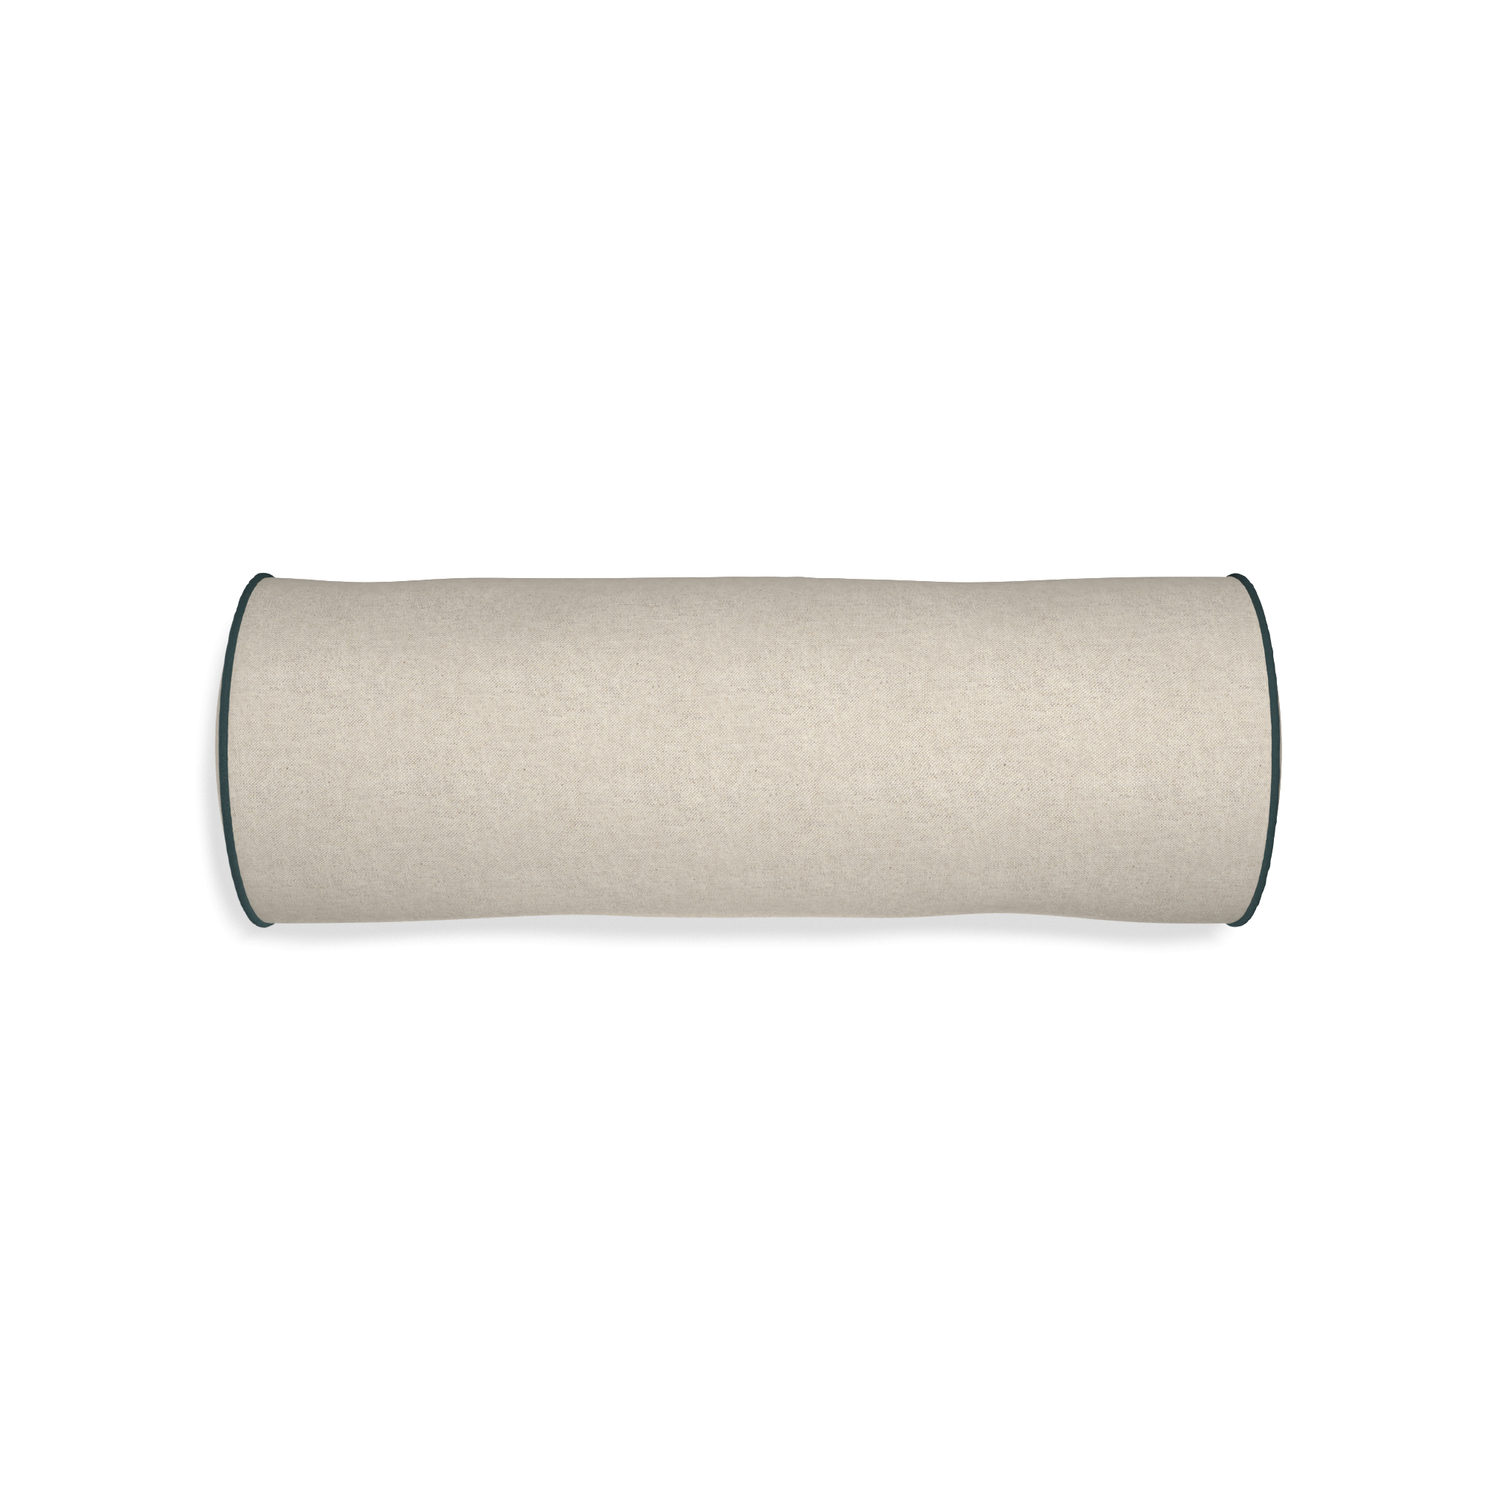 Bolster oat custom light brownpillow with p piping on white background